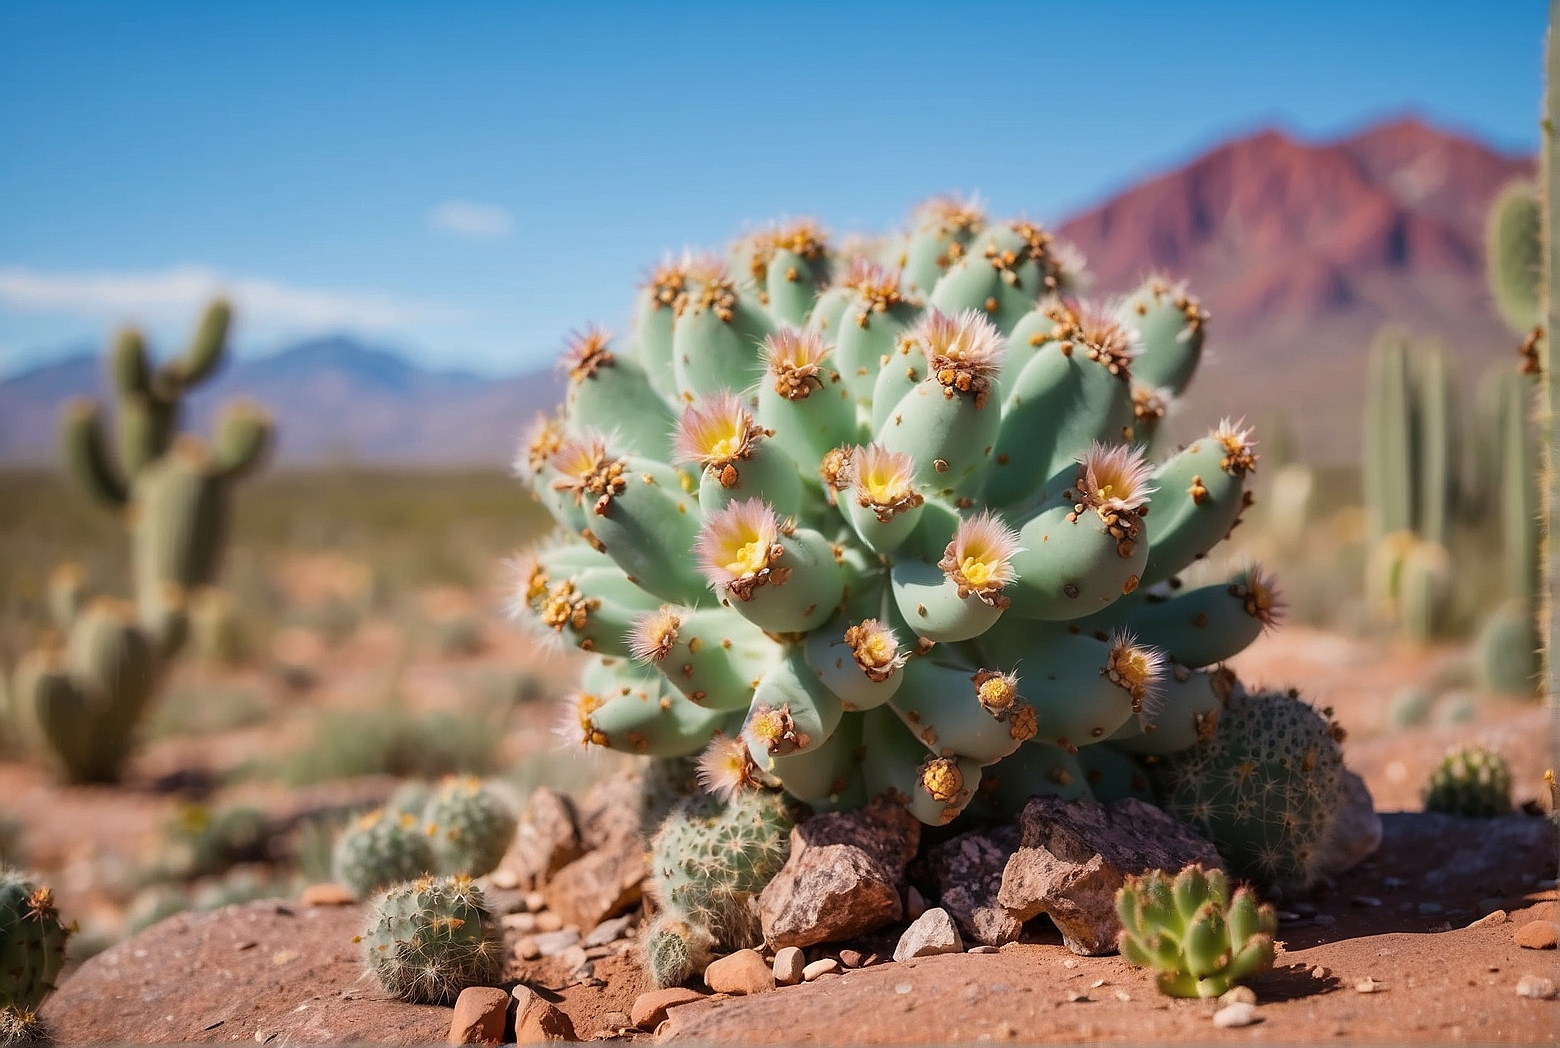 What You Need to Know About the Edibility of the Peyote Cactus